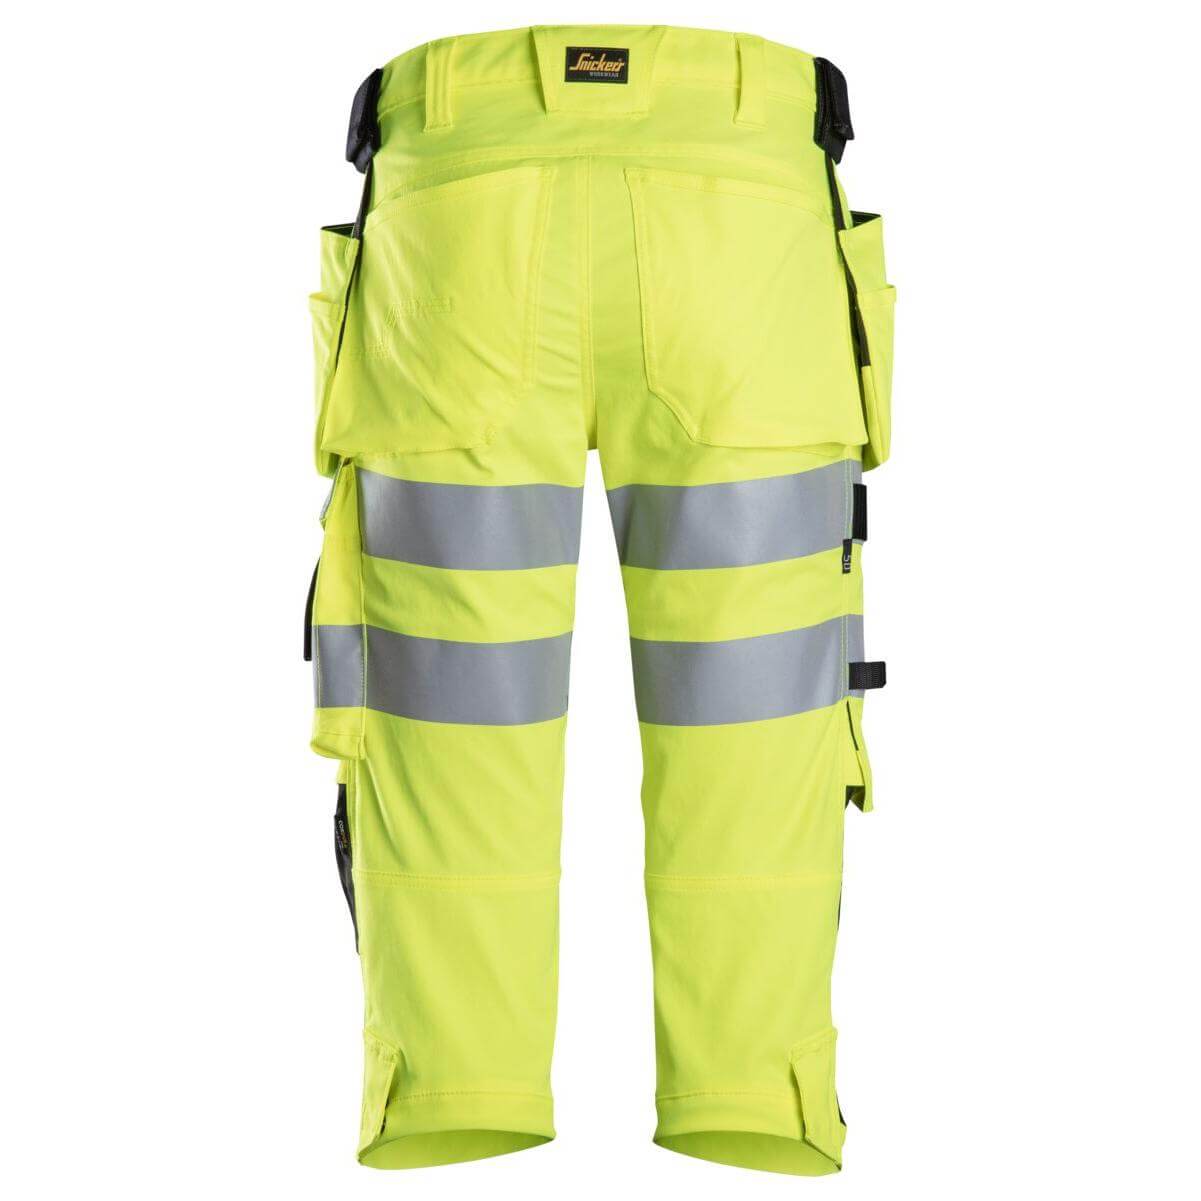 Snickers 6138 Hi Vis Slim Fit Stretch Pirate Shorts with Holster Pockets Class 1 2 Hi Vis Yellow Black back #colour_hi-vis-yellow-black